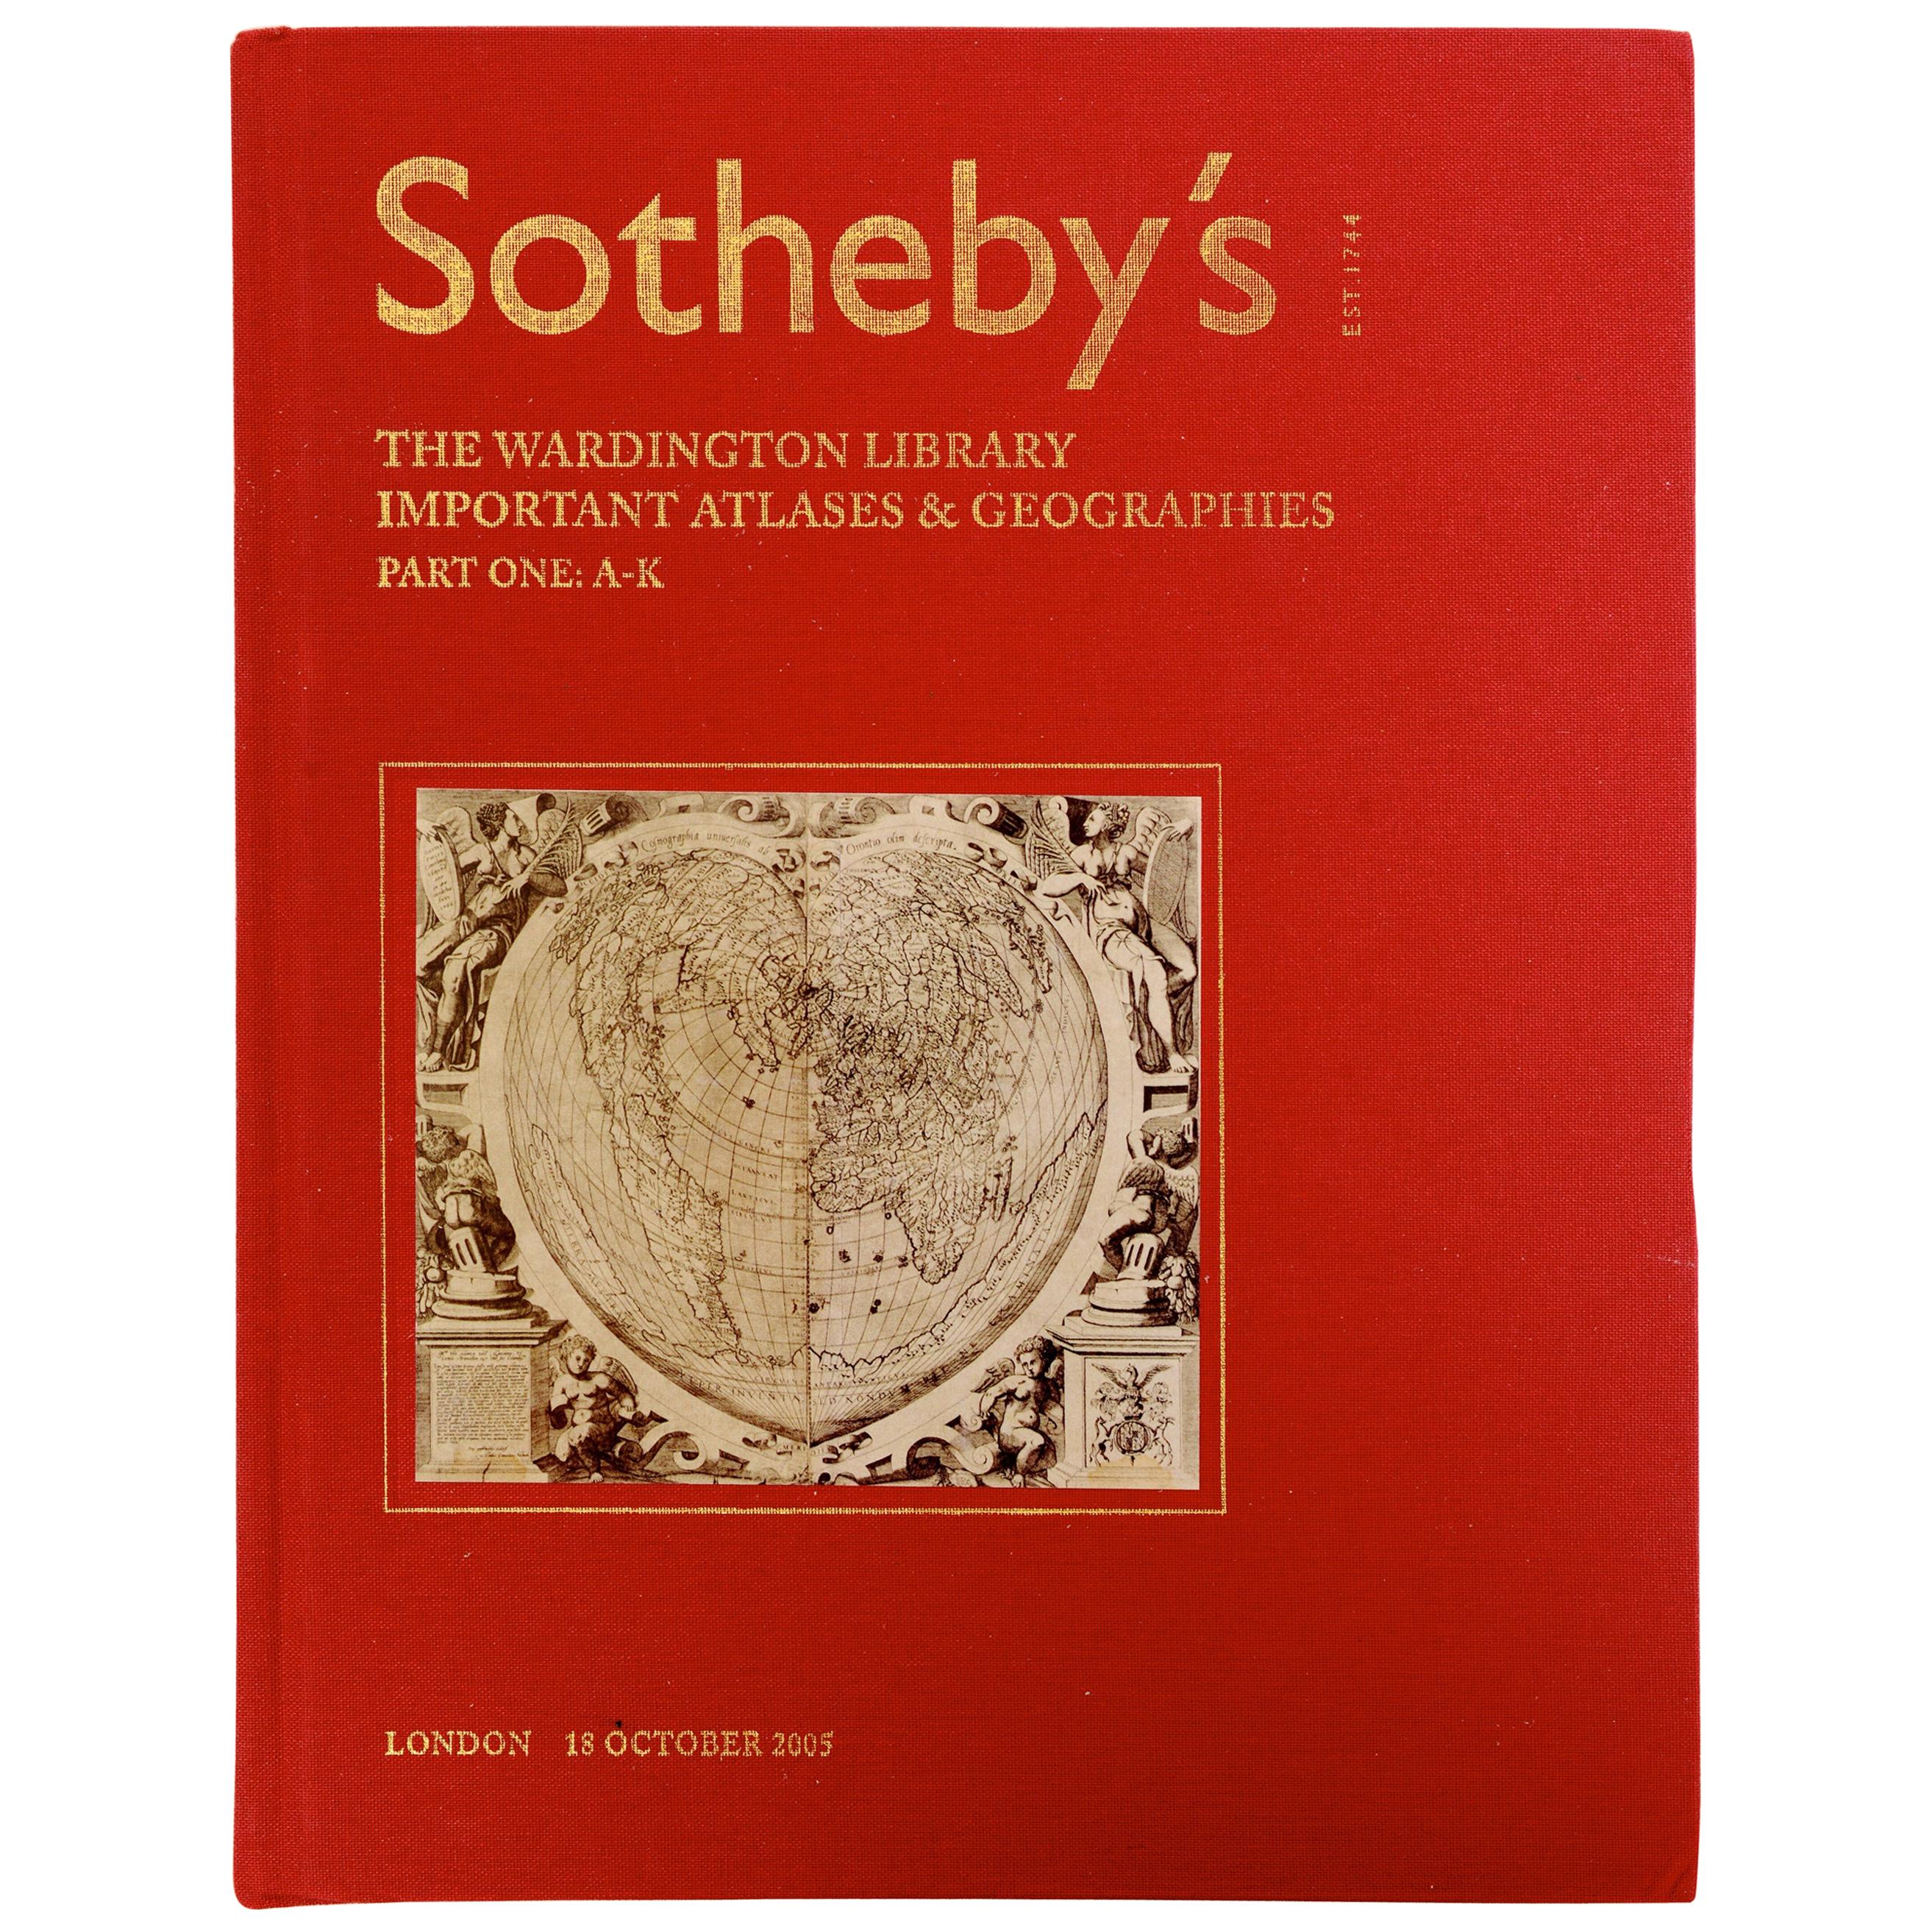 Sotheby's The Wardington Library, Important Atlases and Geographies, Part 1 A-K